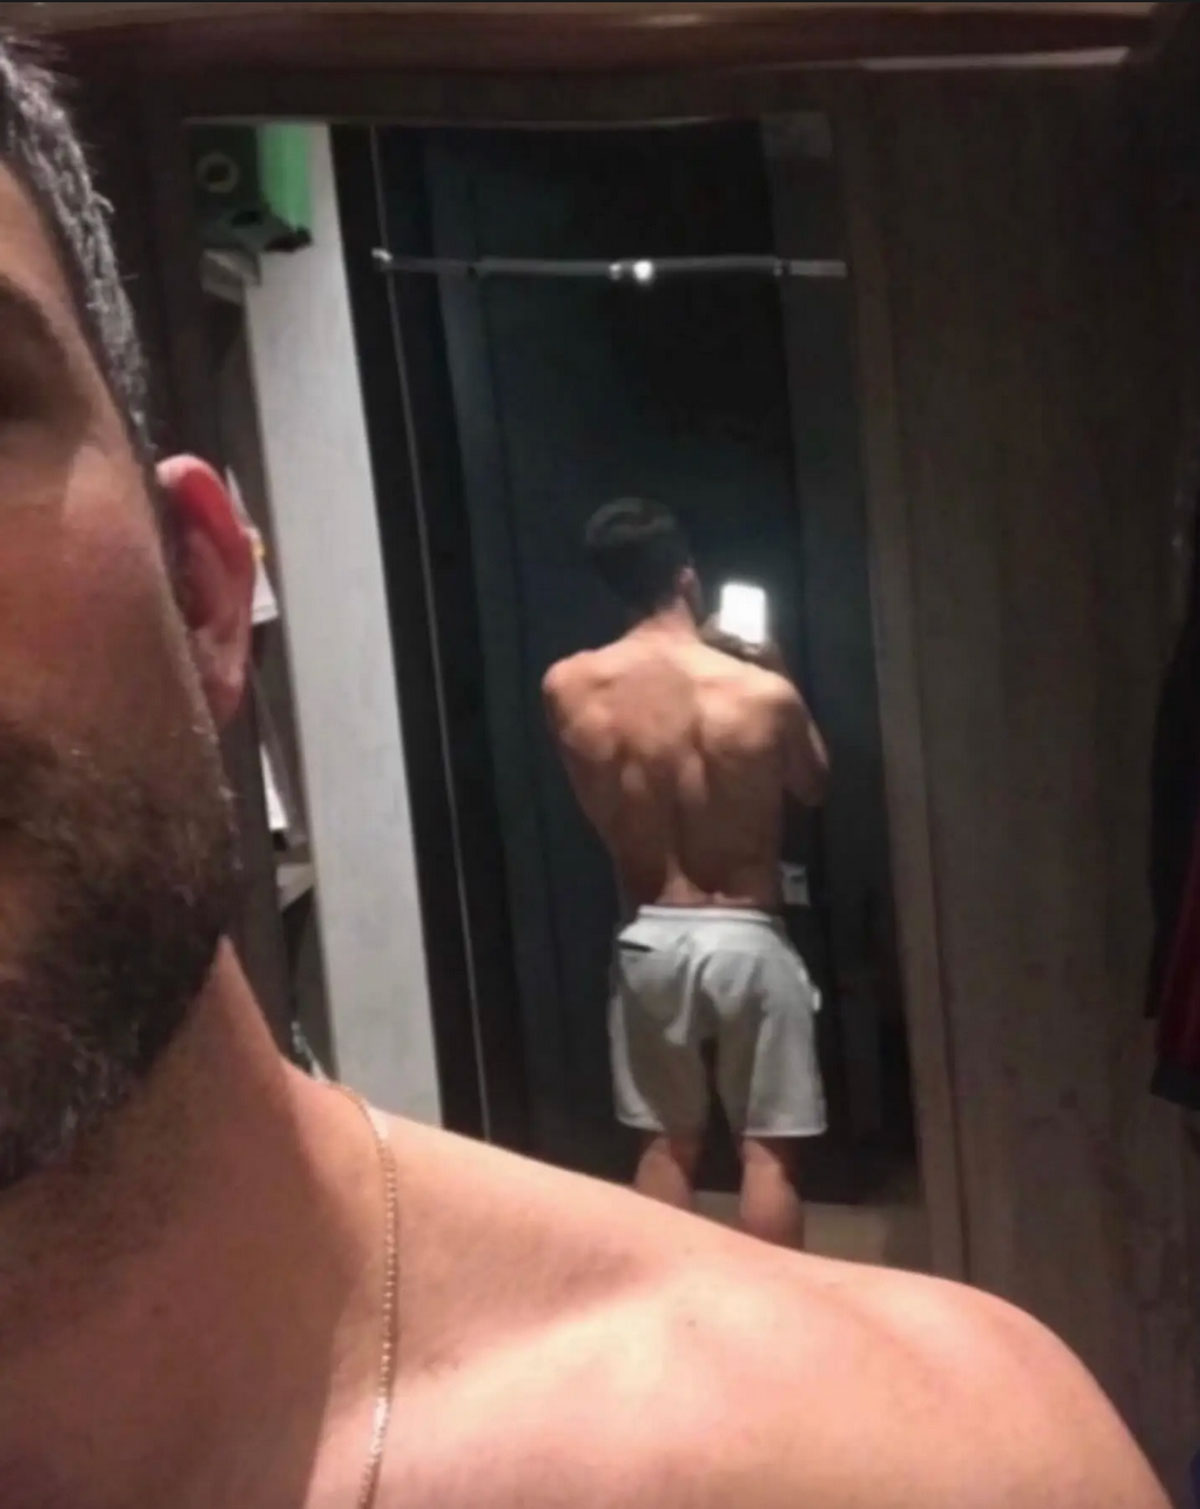 Britney Spears Posts Thirst Trap Of So-Called ‘Uncle’ – But It Looks A LOT Like You Know Who!